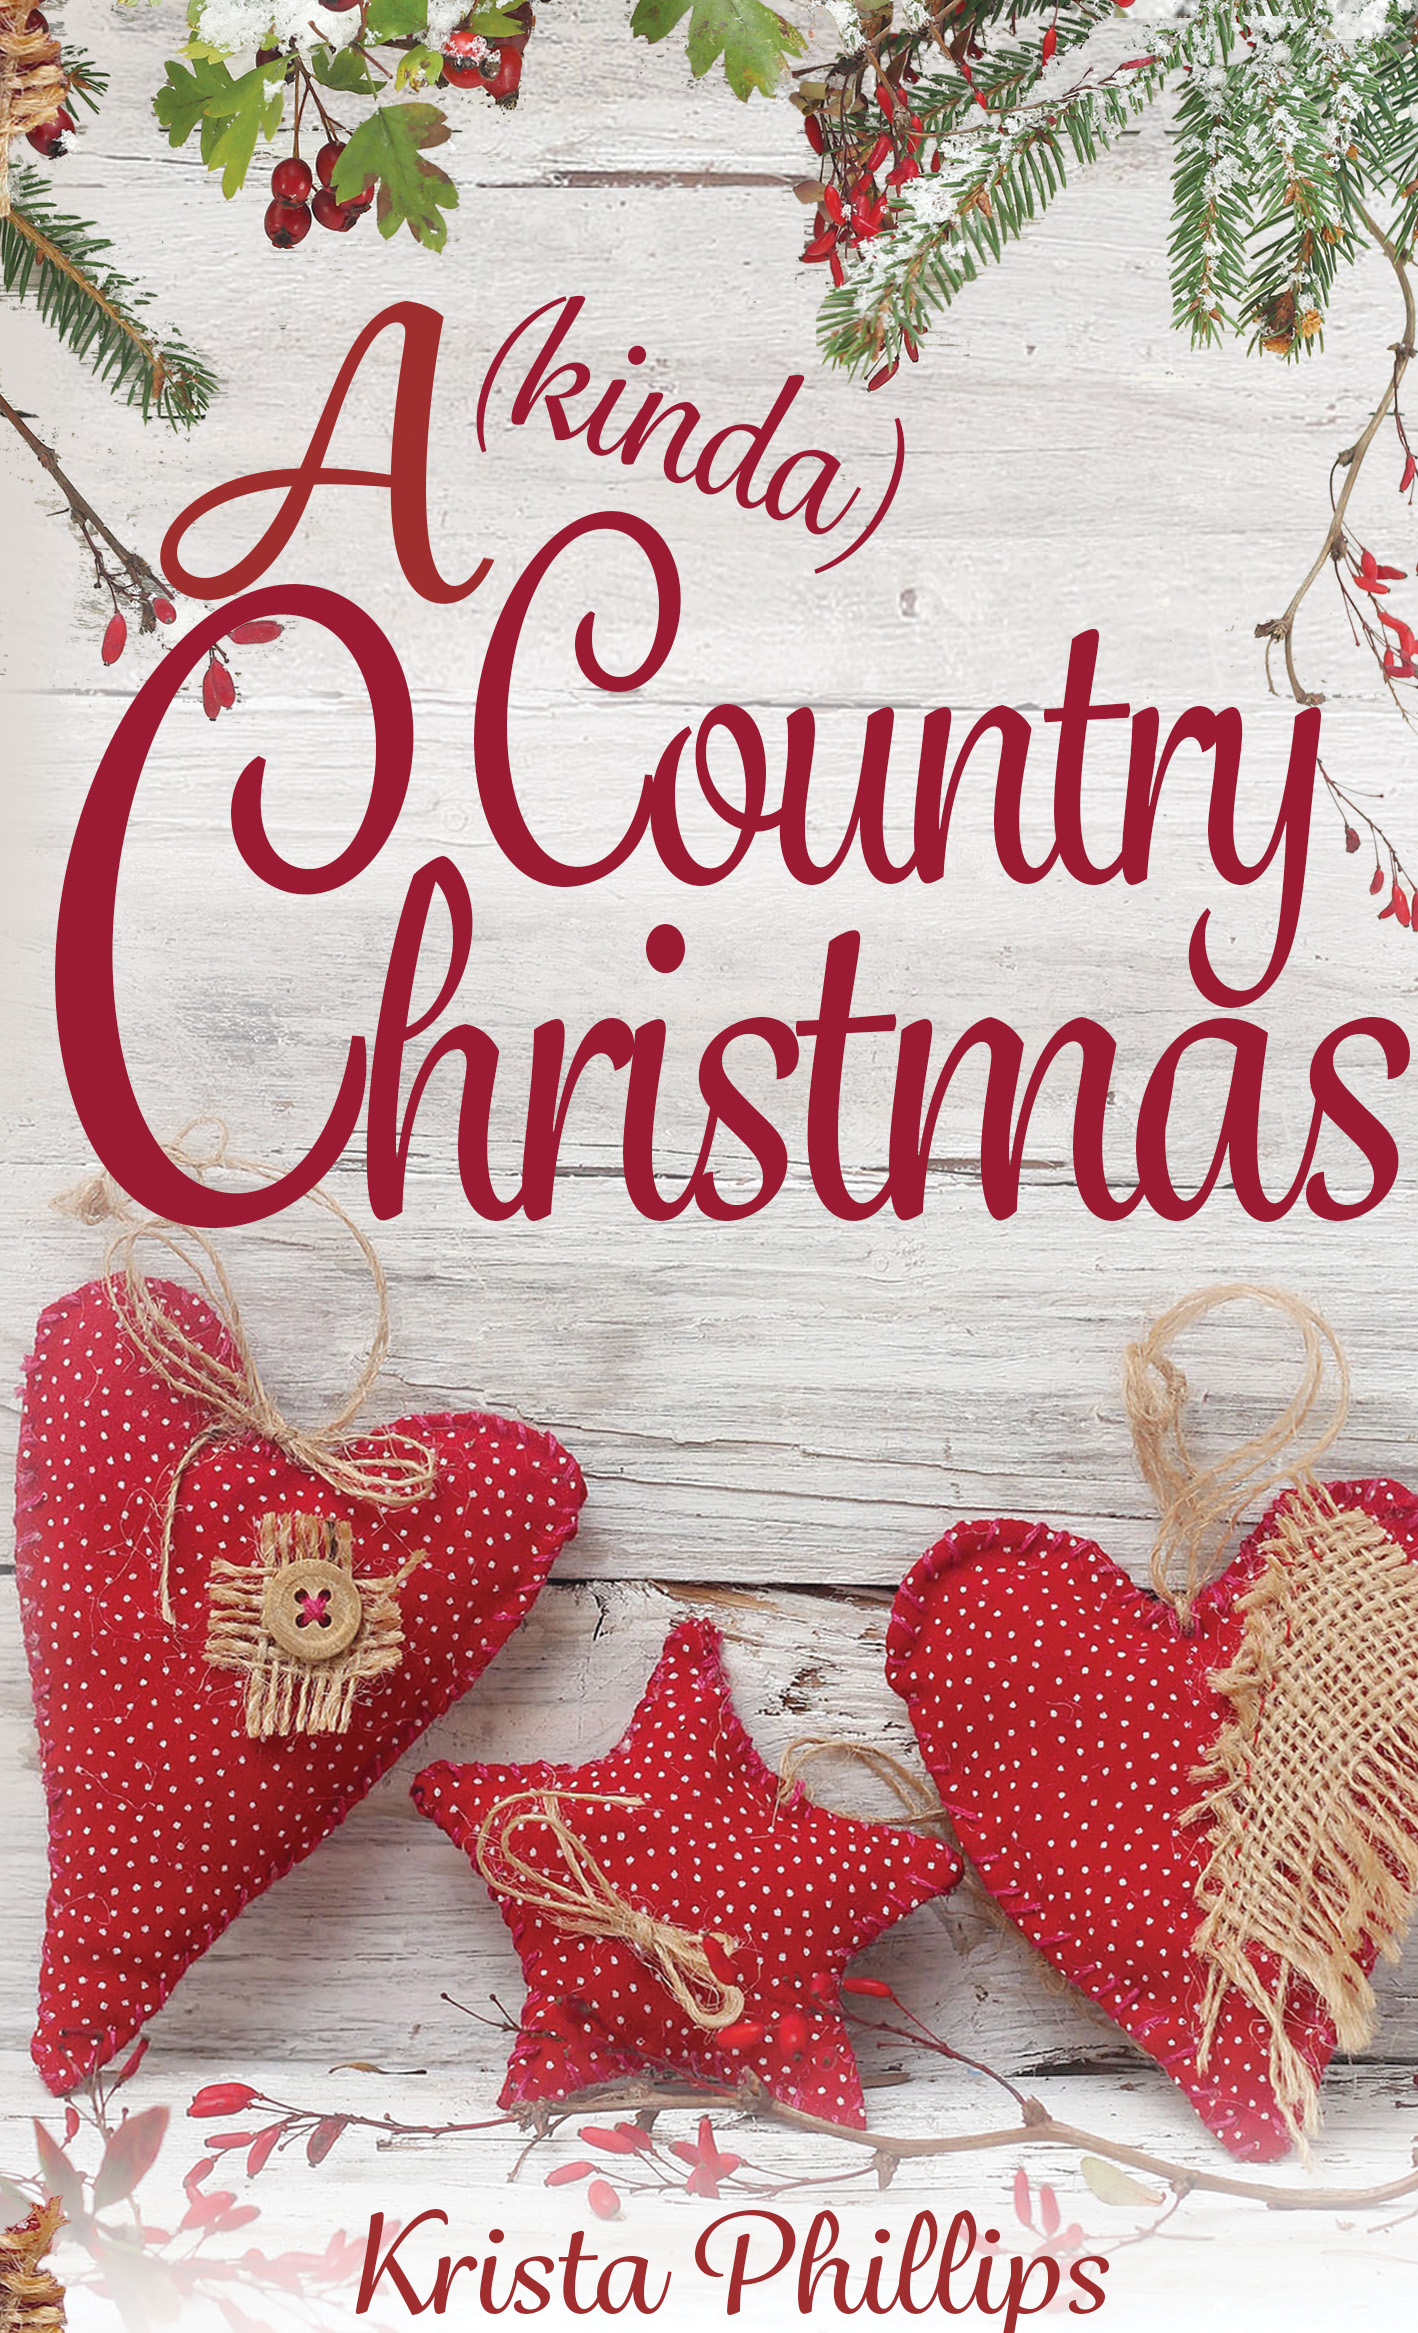 FREE: A (kinda) Country Christmas by Krista Phillips